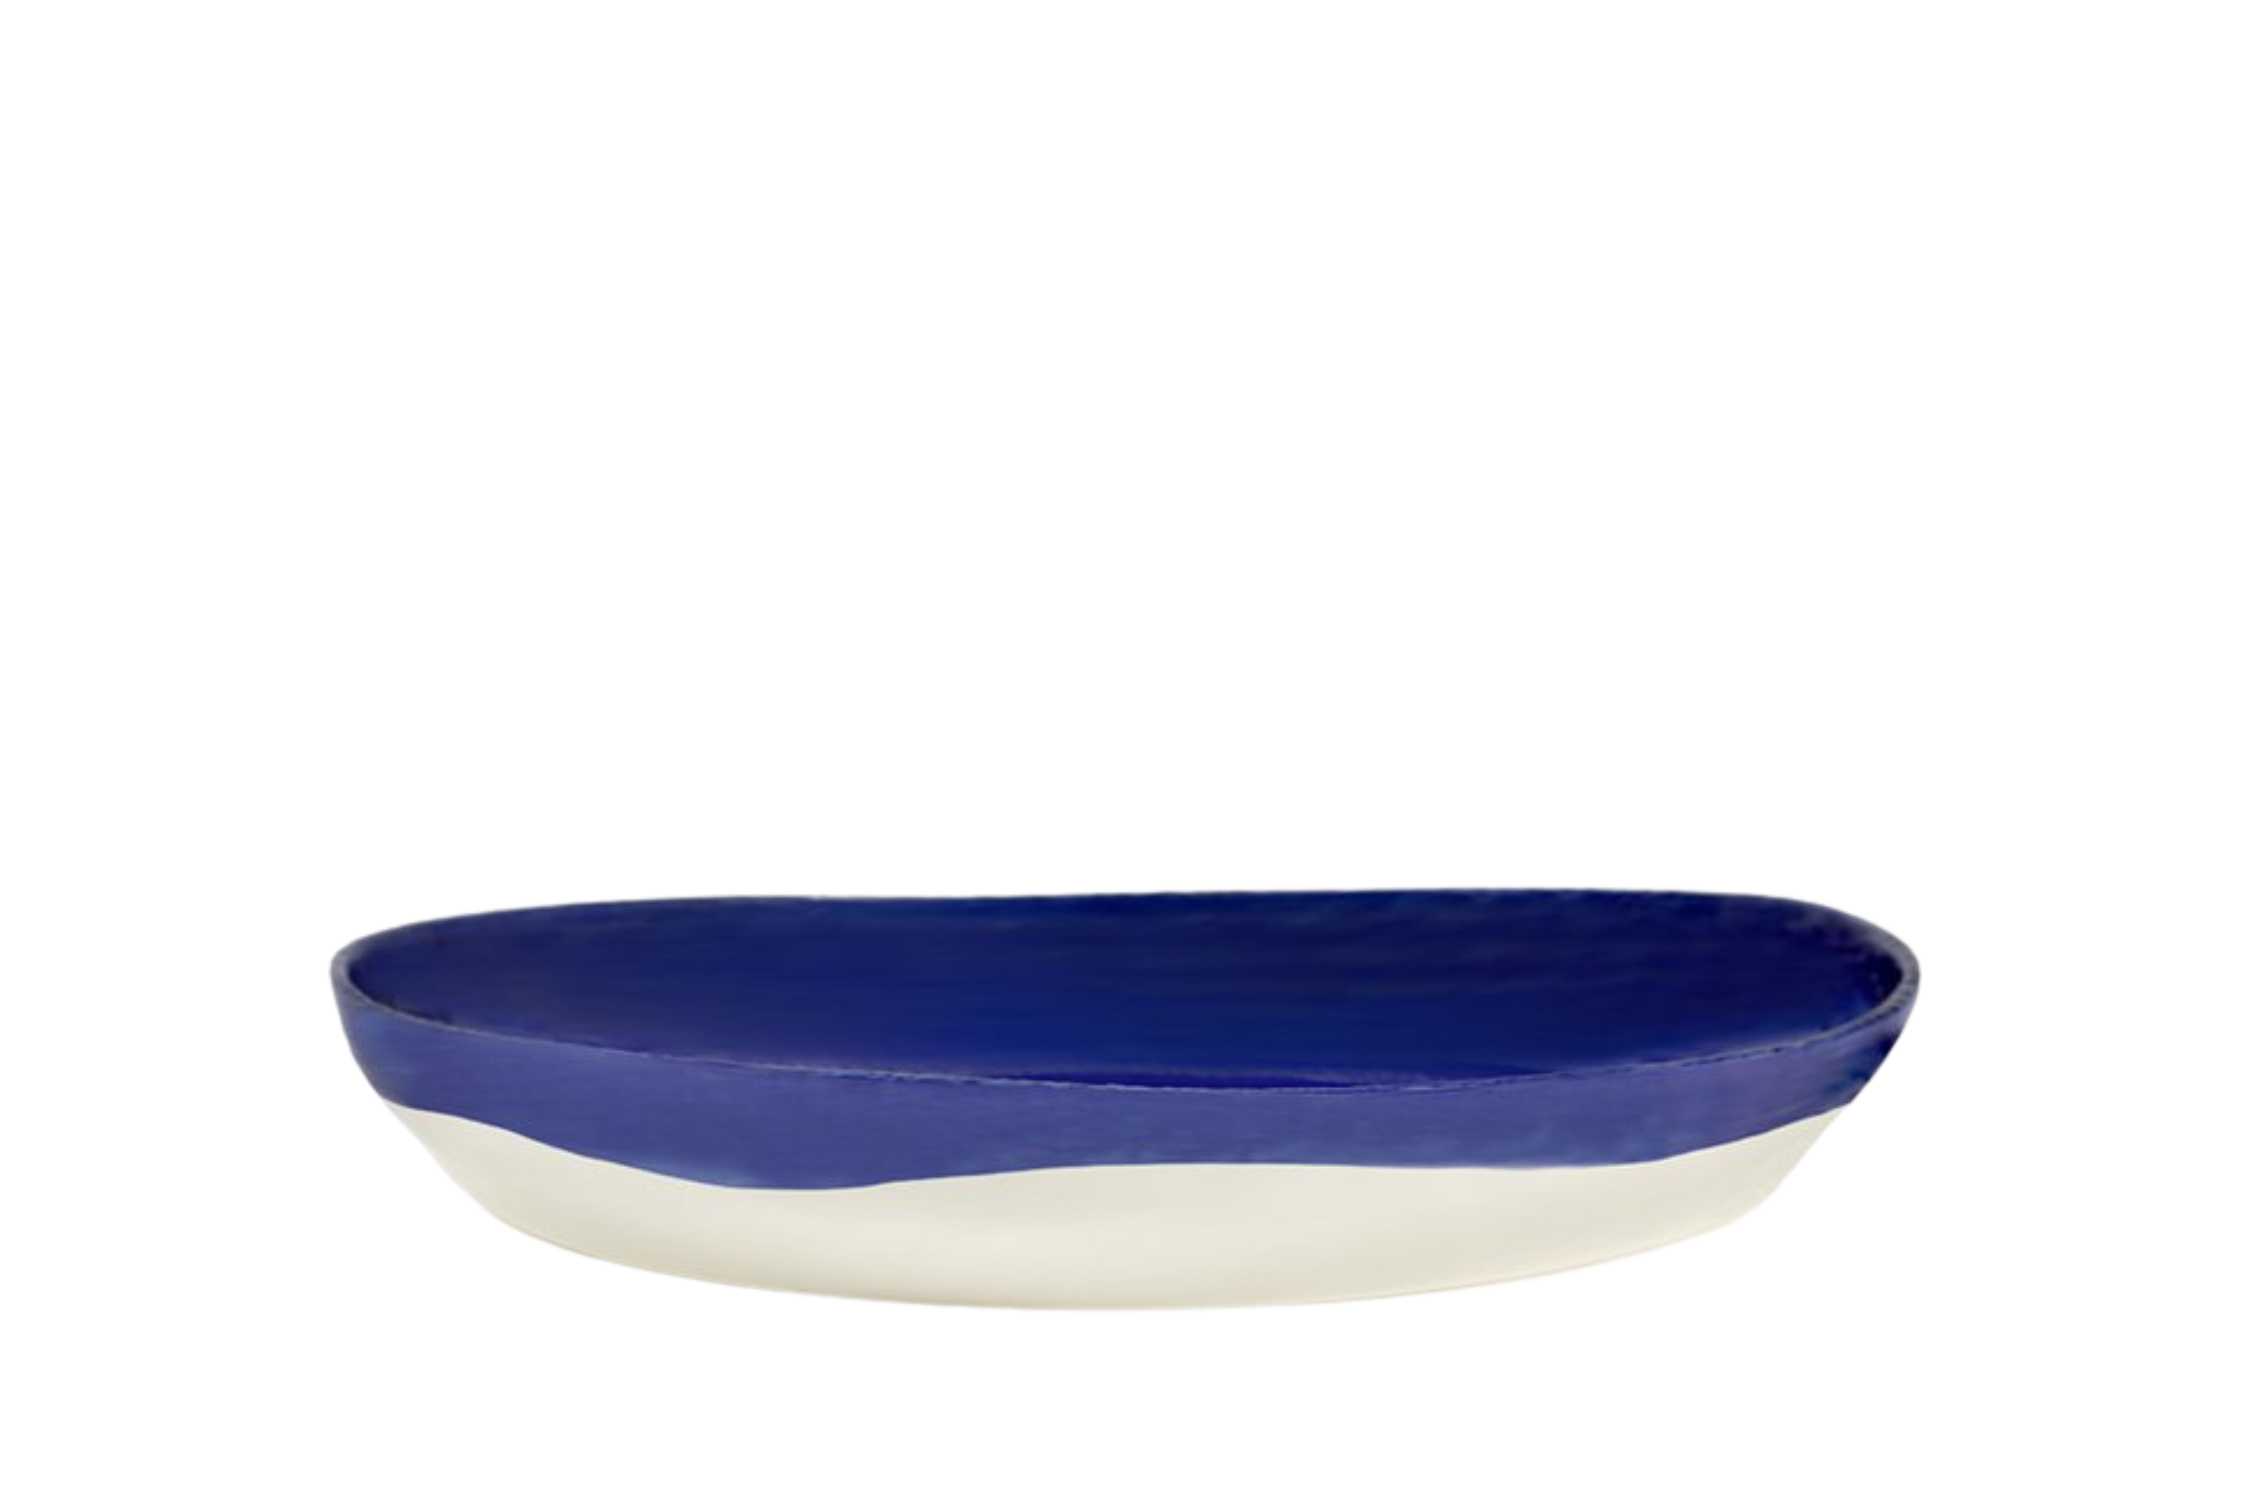 Serax Feast Serving Plate by Yotam Ottolenghi & Bisignano